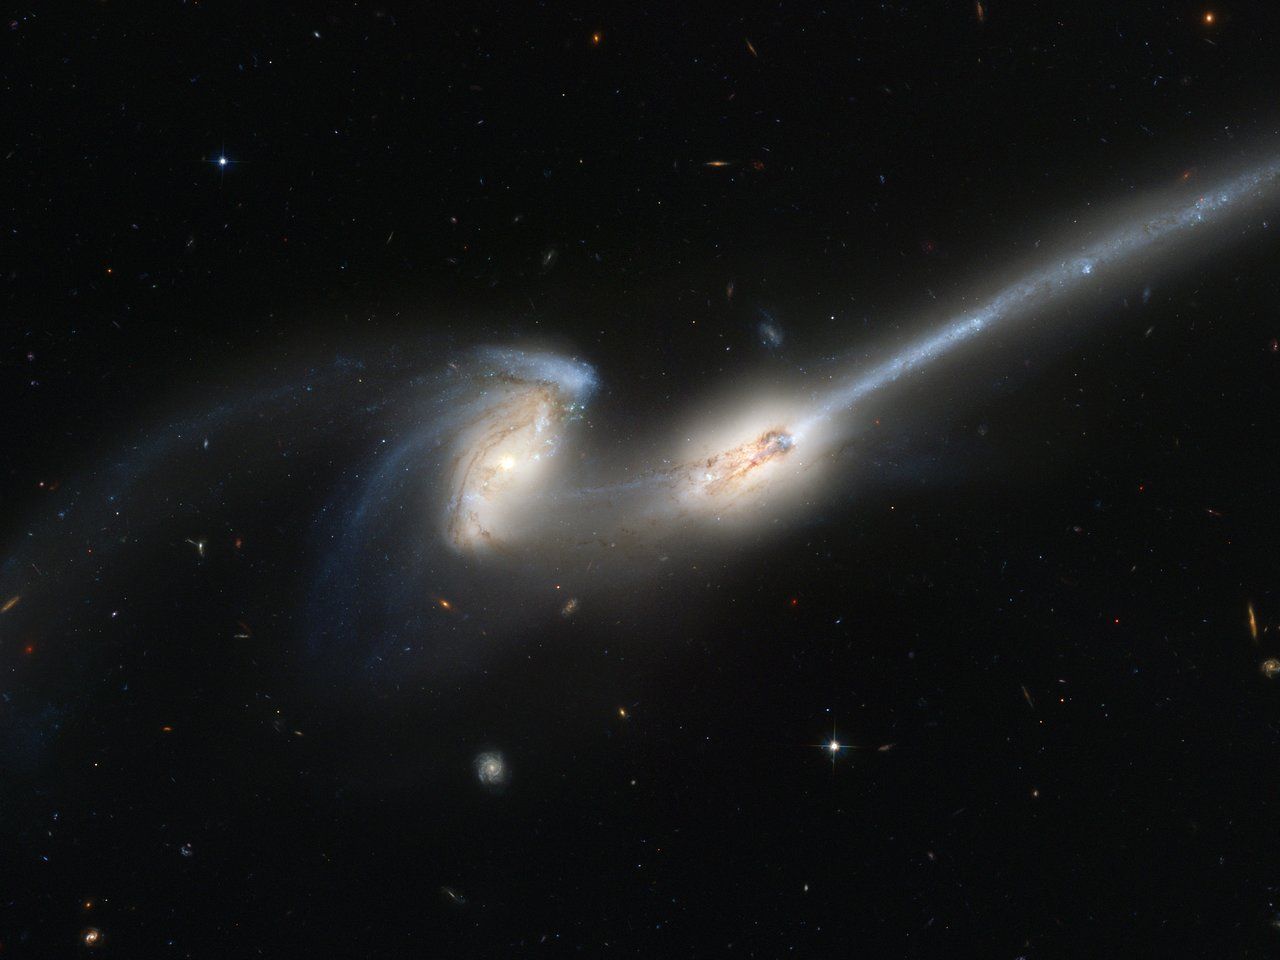 These two galaxies, nicknamed "mice" Currently merging